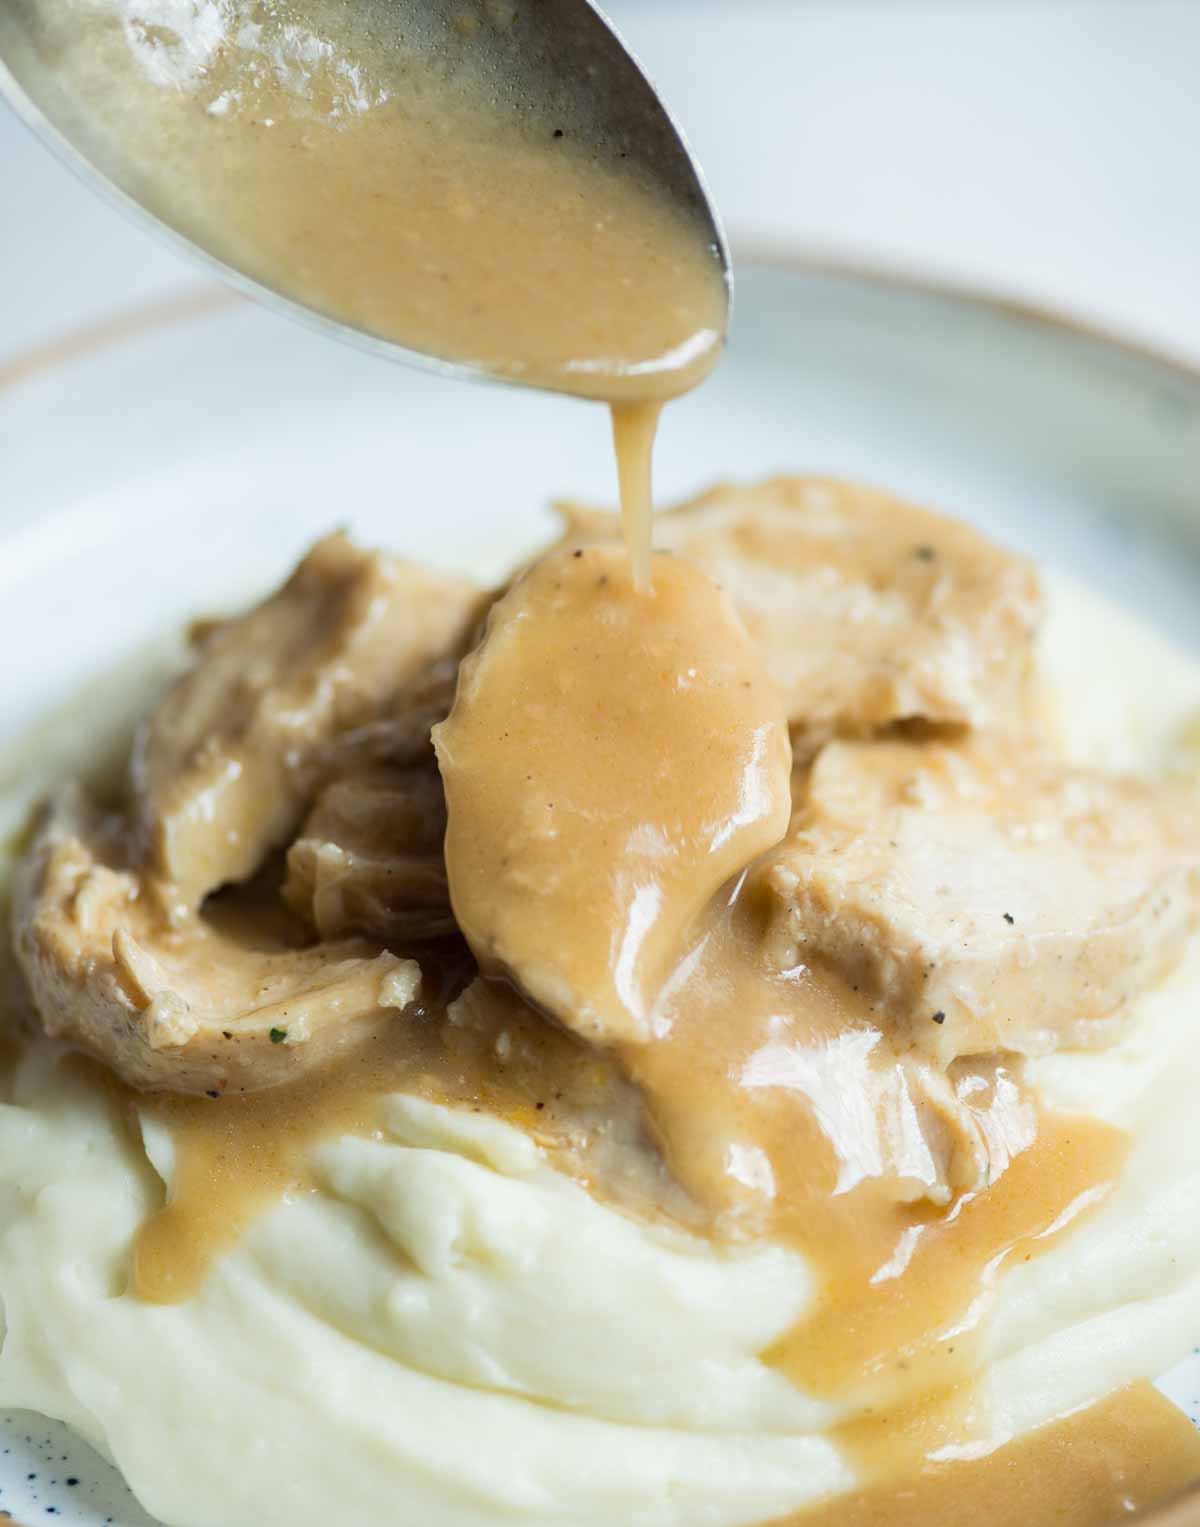 Chicken and gravy made in the Instant pot have tender chicken breast and creamy thick gravy made from scratch. Made totally from scratch without any gravy mix or canned soup mix. 